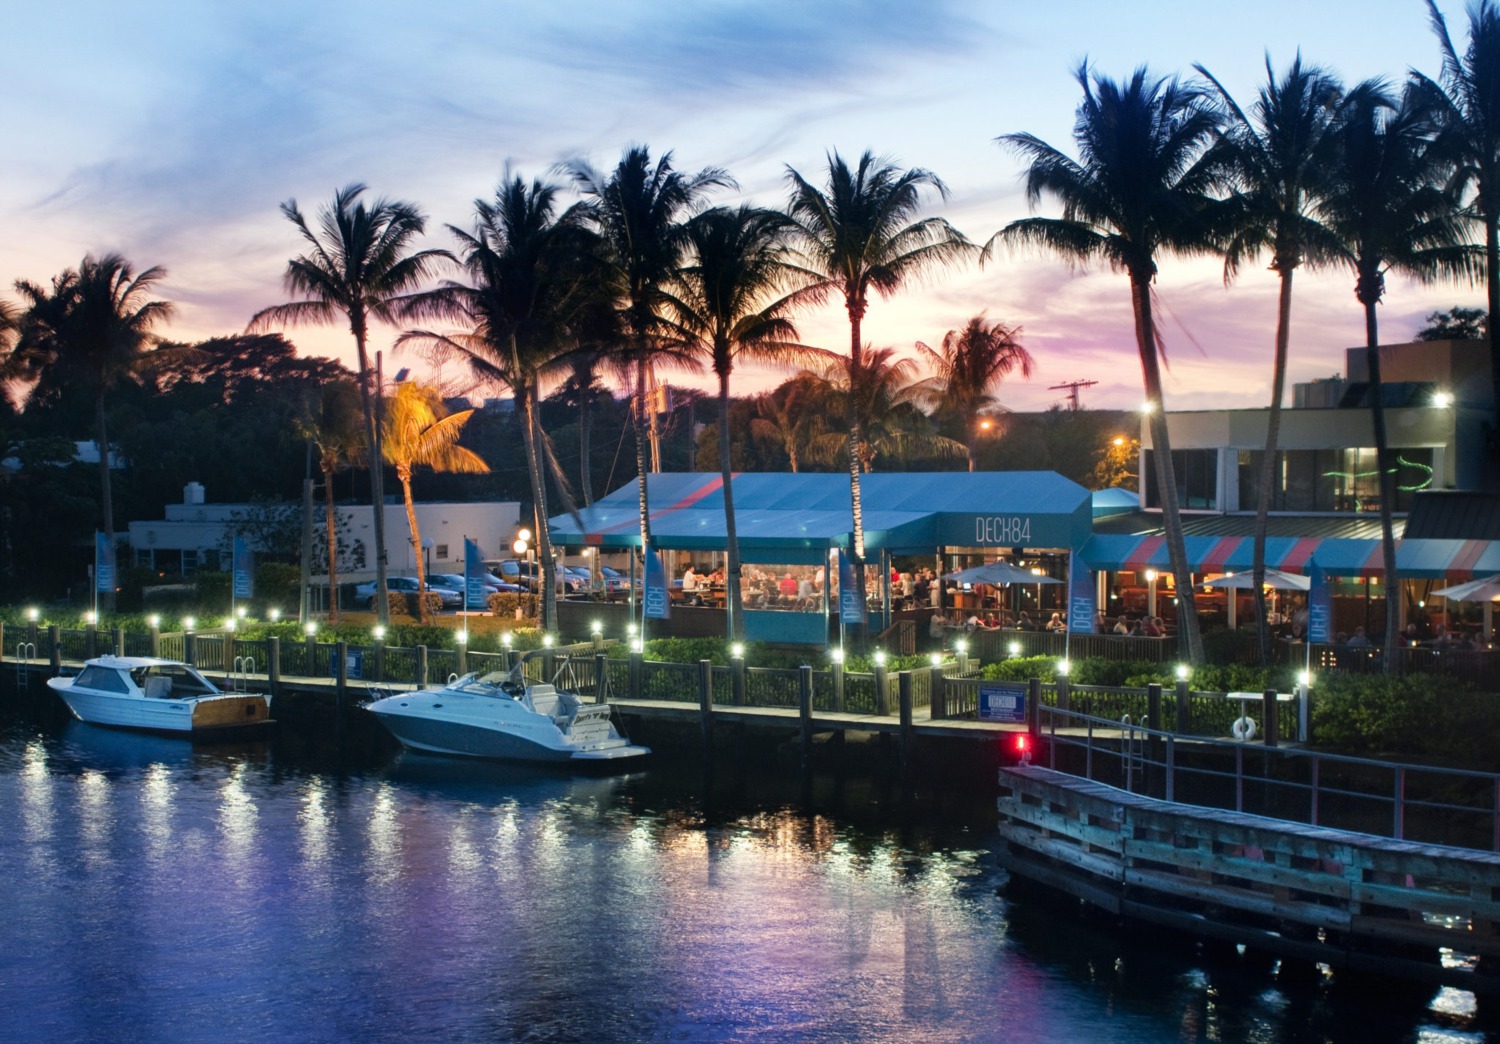 Lakefront Lounge - Drink & Dine at Palm Court - The Boca Raton